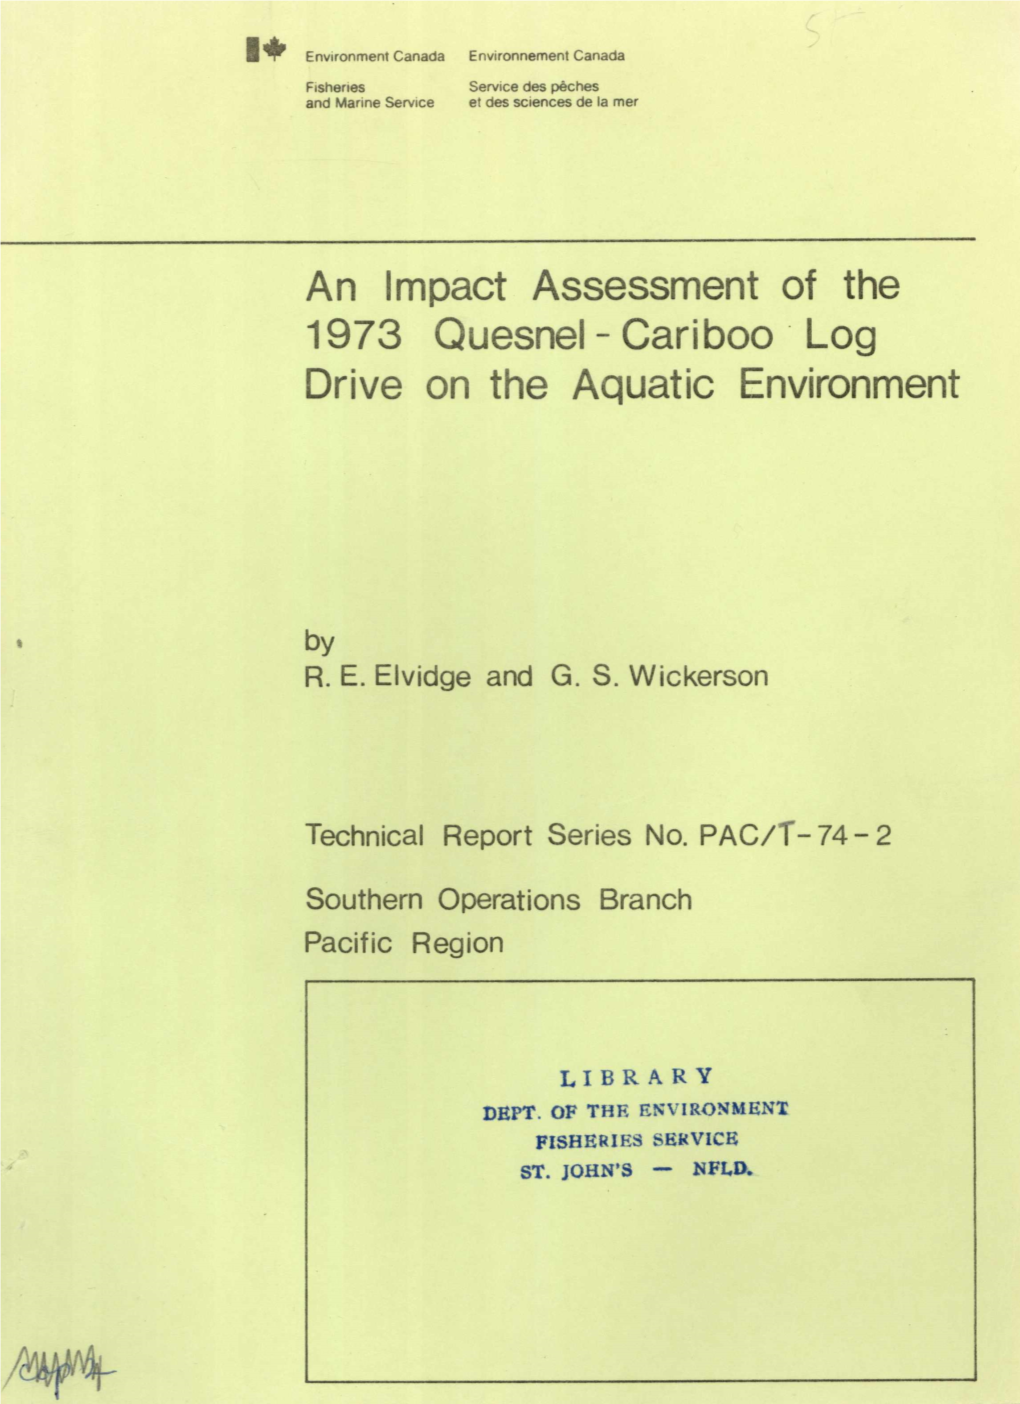 An Impact Assessment of the 1973 Quesnel-Cariboo Log Drive on the Aquatic Environment